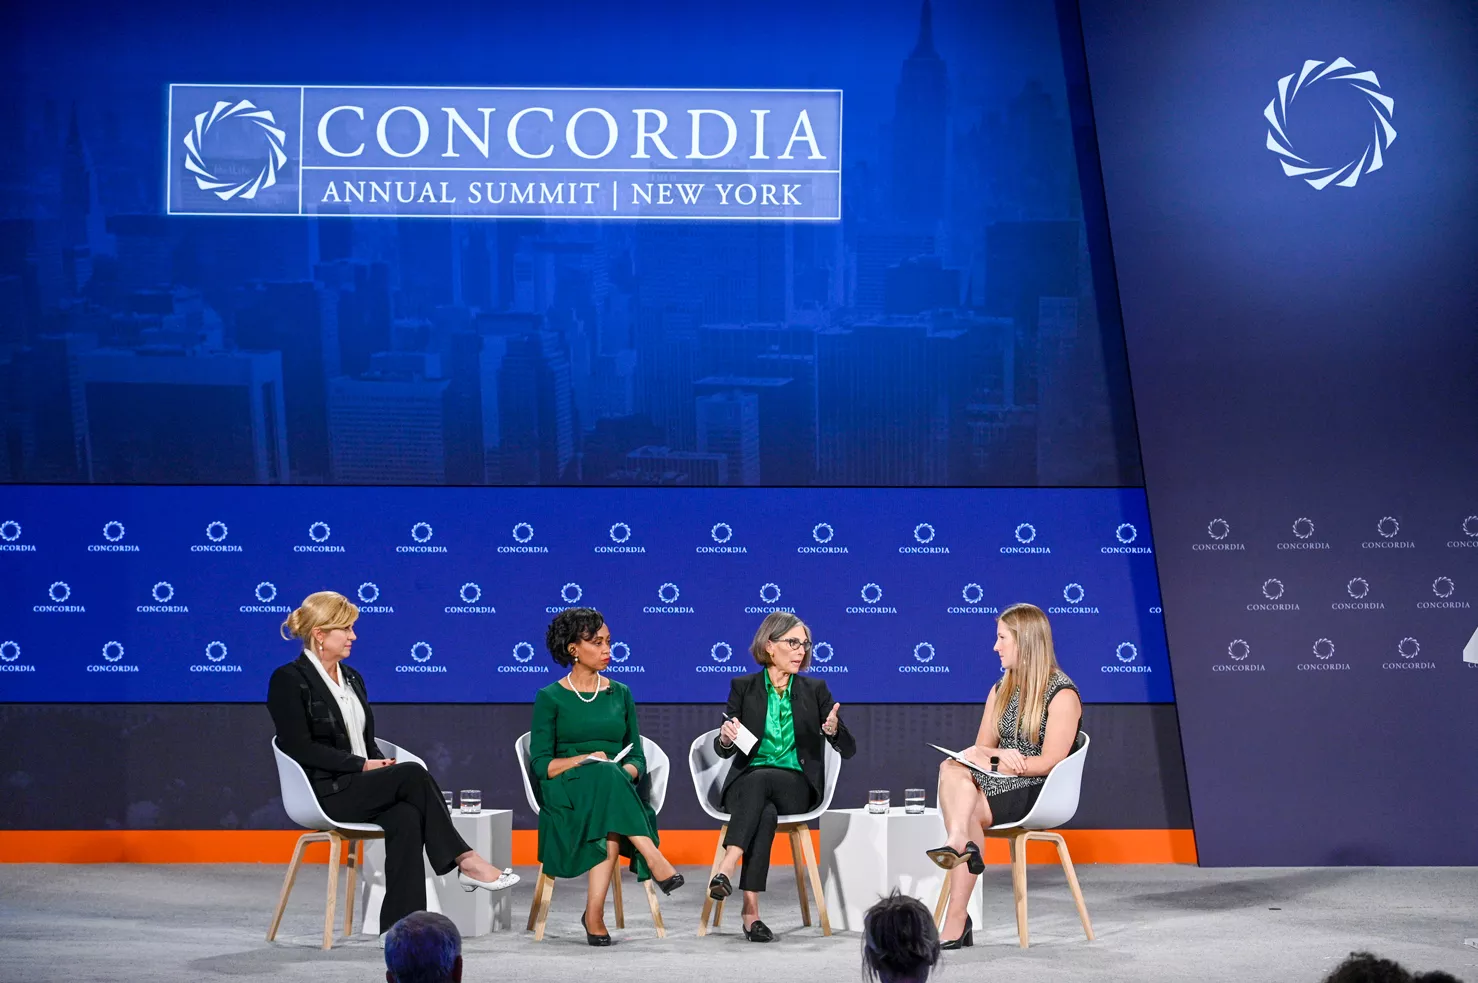 Dr. Harvey and other panelists speak about women’s health on Concordia Summit stage.